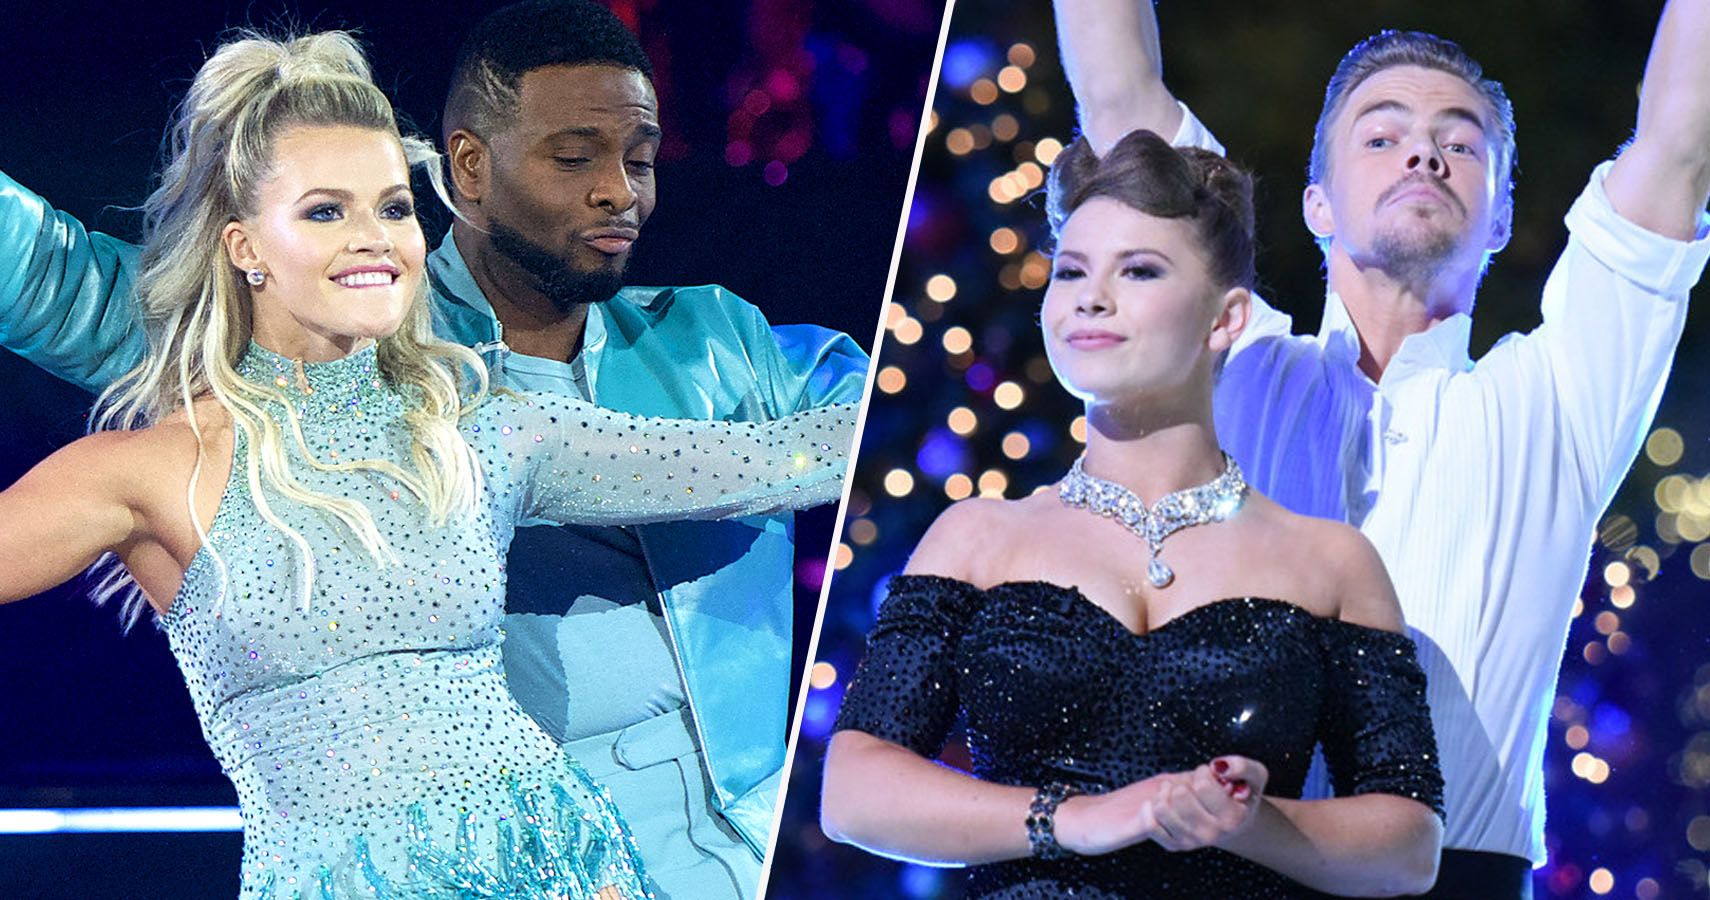 We've Ranked The Top 20 Dancing With The Stars Contestants From Worst